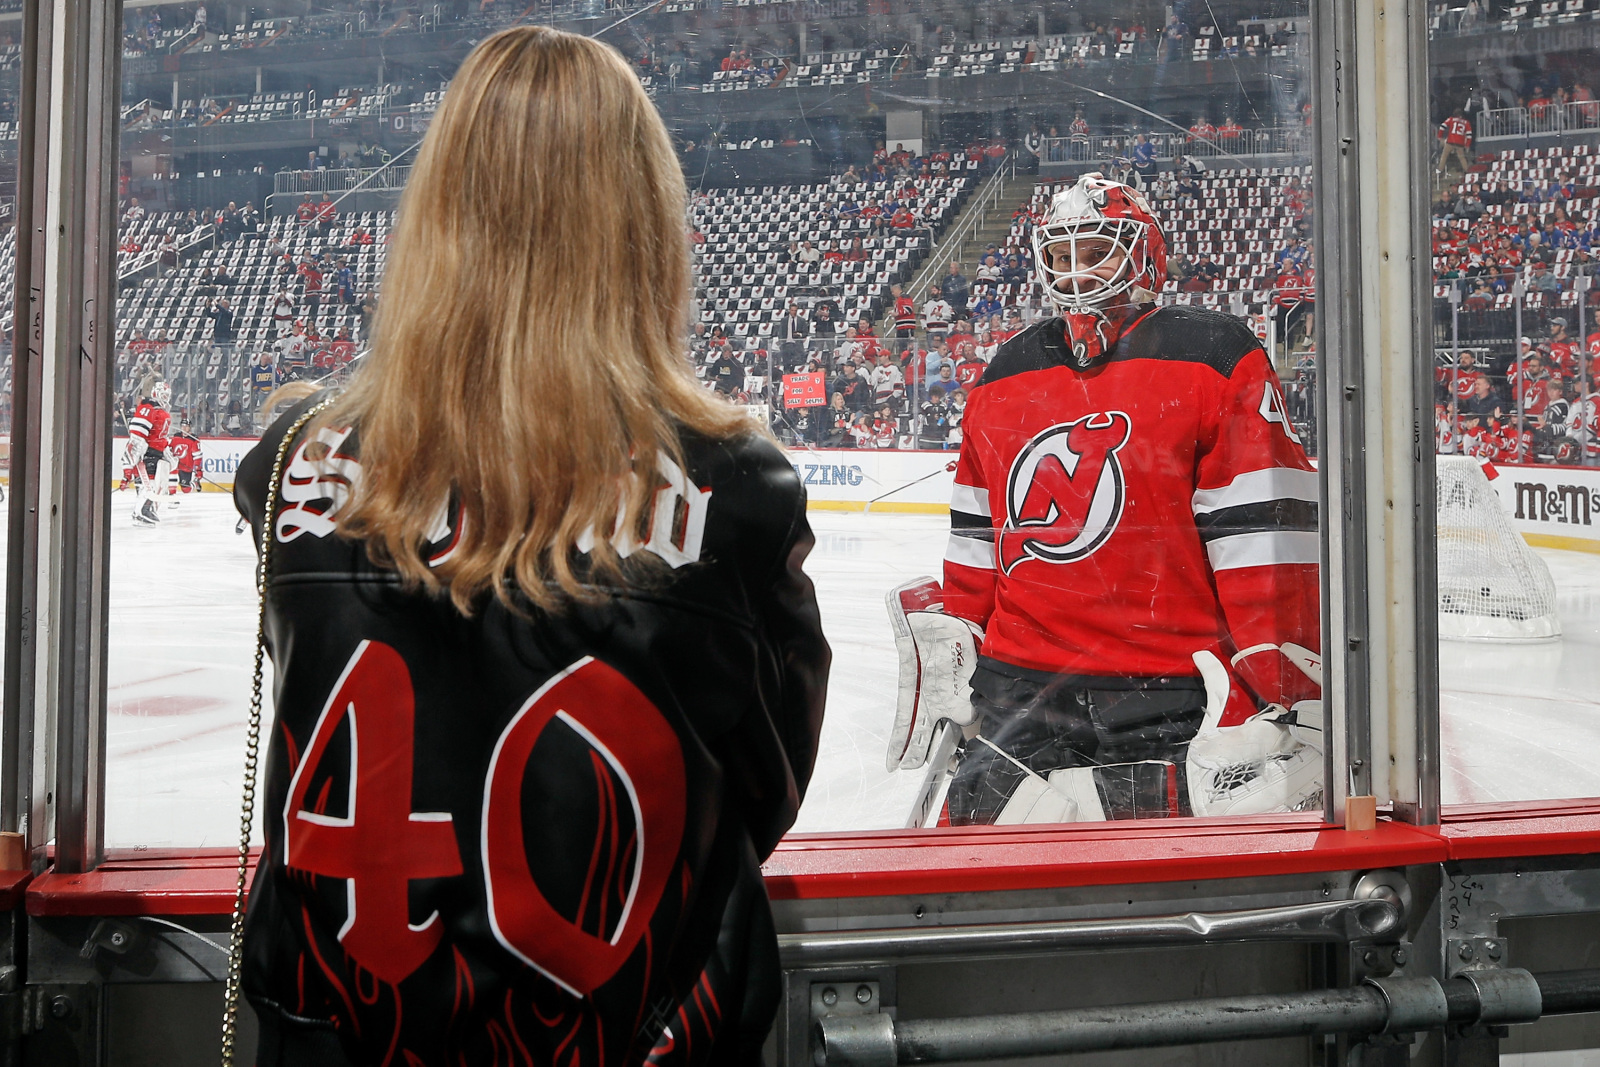 All signs point to Akira Schmid as Devils starting goalie in Game 3 vs.  Rangers 